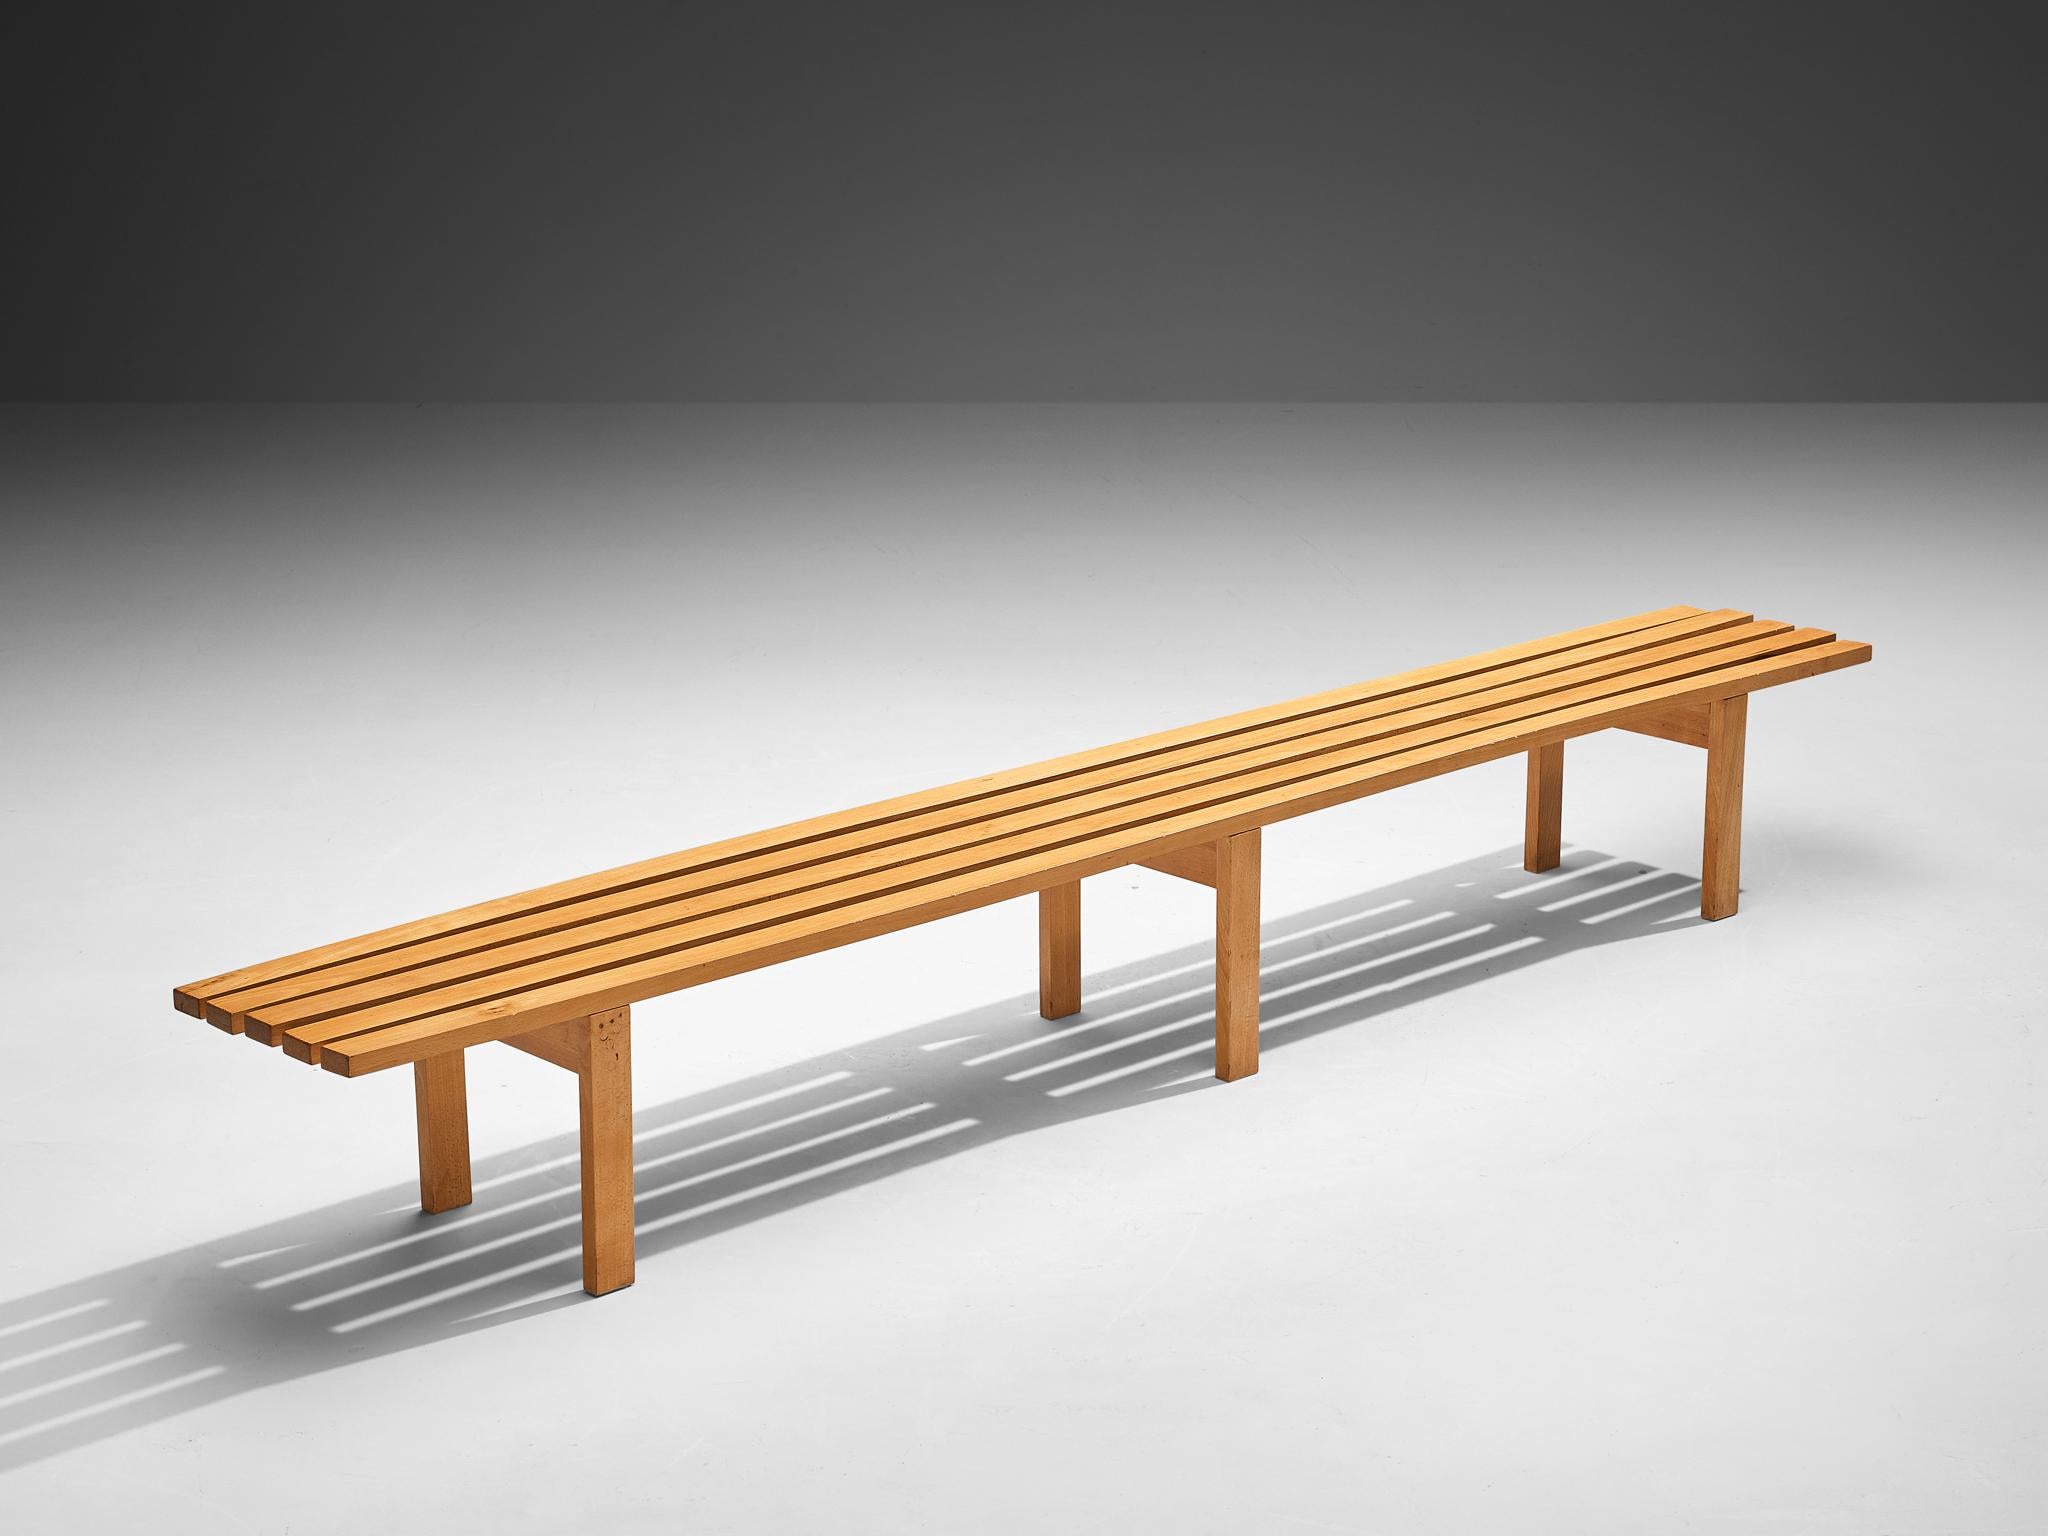 Bench, beech, Scandinavia, 1960s

Tranquil and stunning design made in Scandinavia in the 1960s. This slatted bench displays a natural and serene appearance, mainly due to the solid beech wood used to produce this piece. The height of the bench and